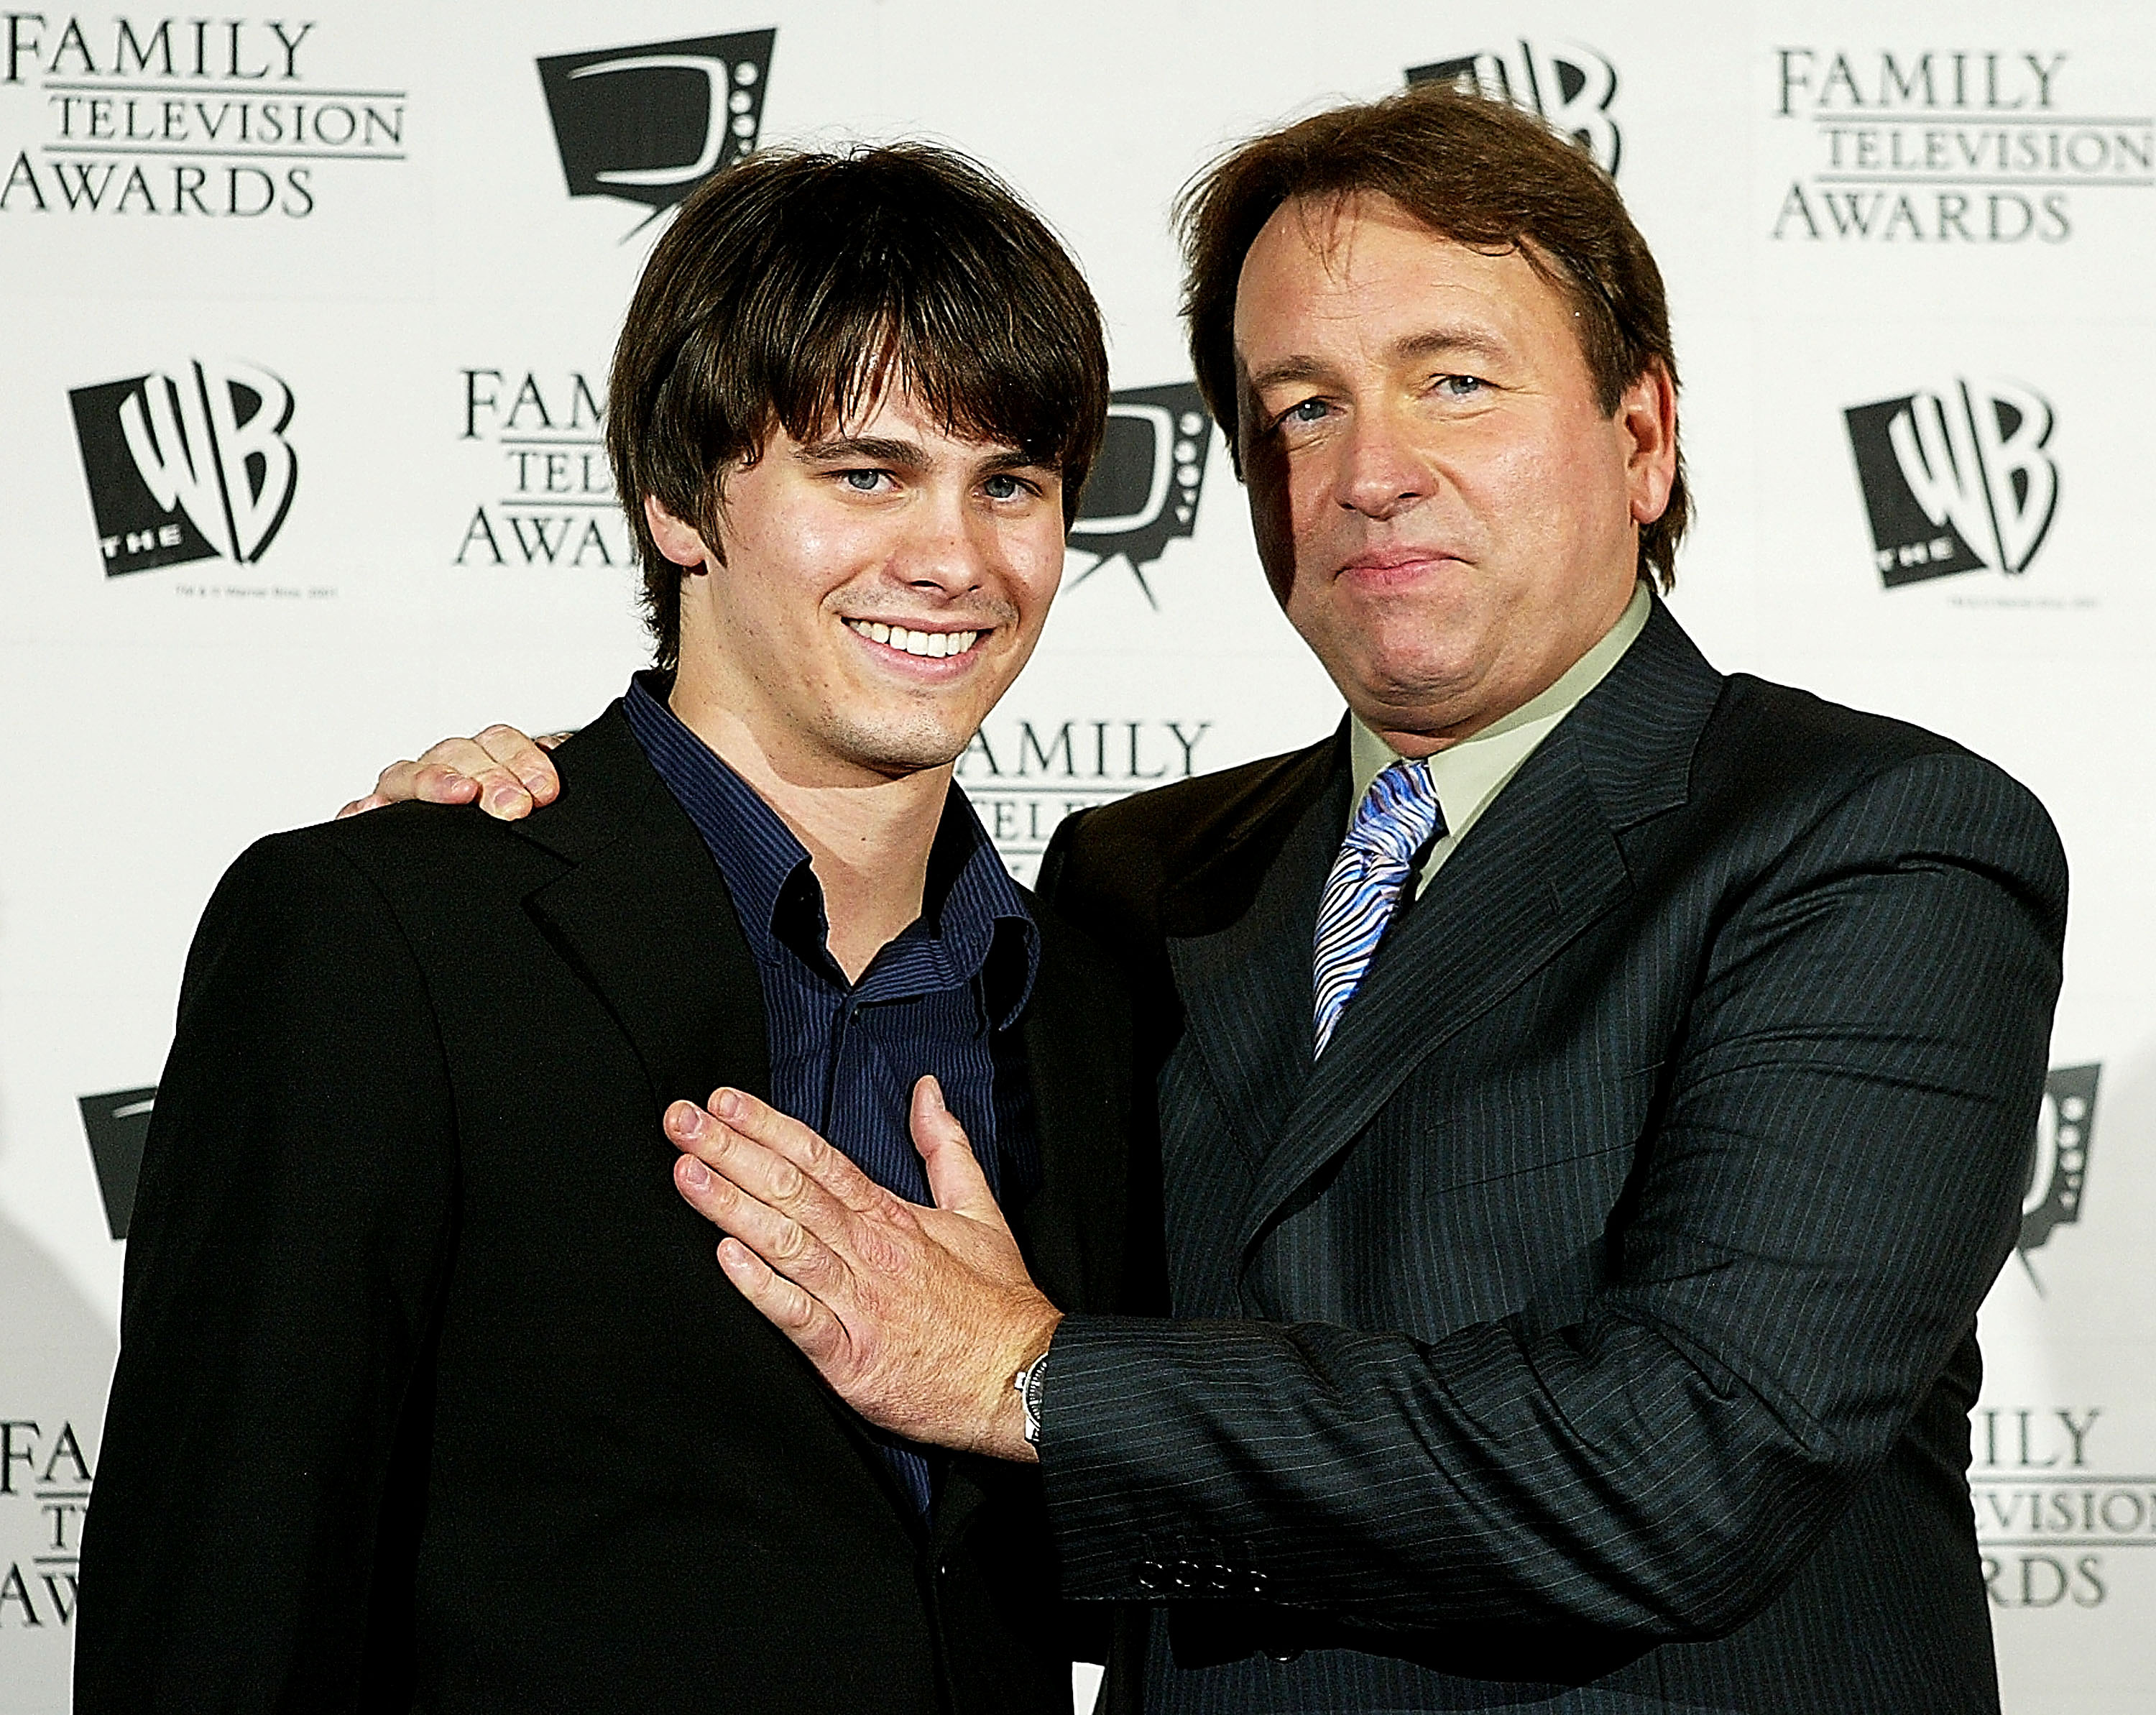 Actors John Ritter (r) with son Jason Ritter pose after winning an award for "8 Simple Rules For Dating My Daughter" in the best comedy catagory "5th Annual Family Television Awards" at the Beverly Hilton Hotel August 14, 2003 in Los Angeles. | Source: Getty Images